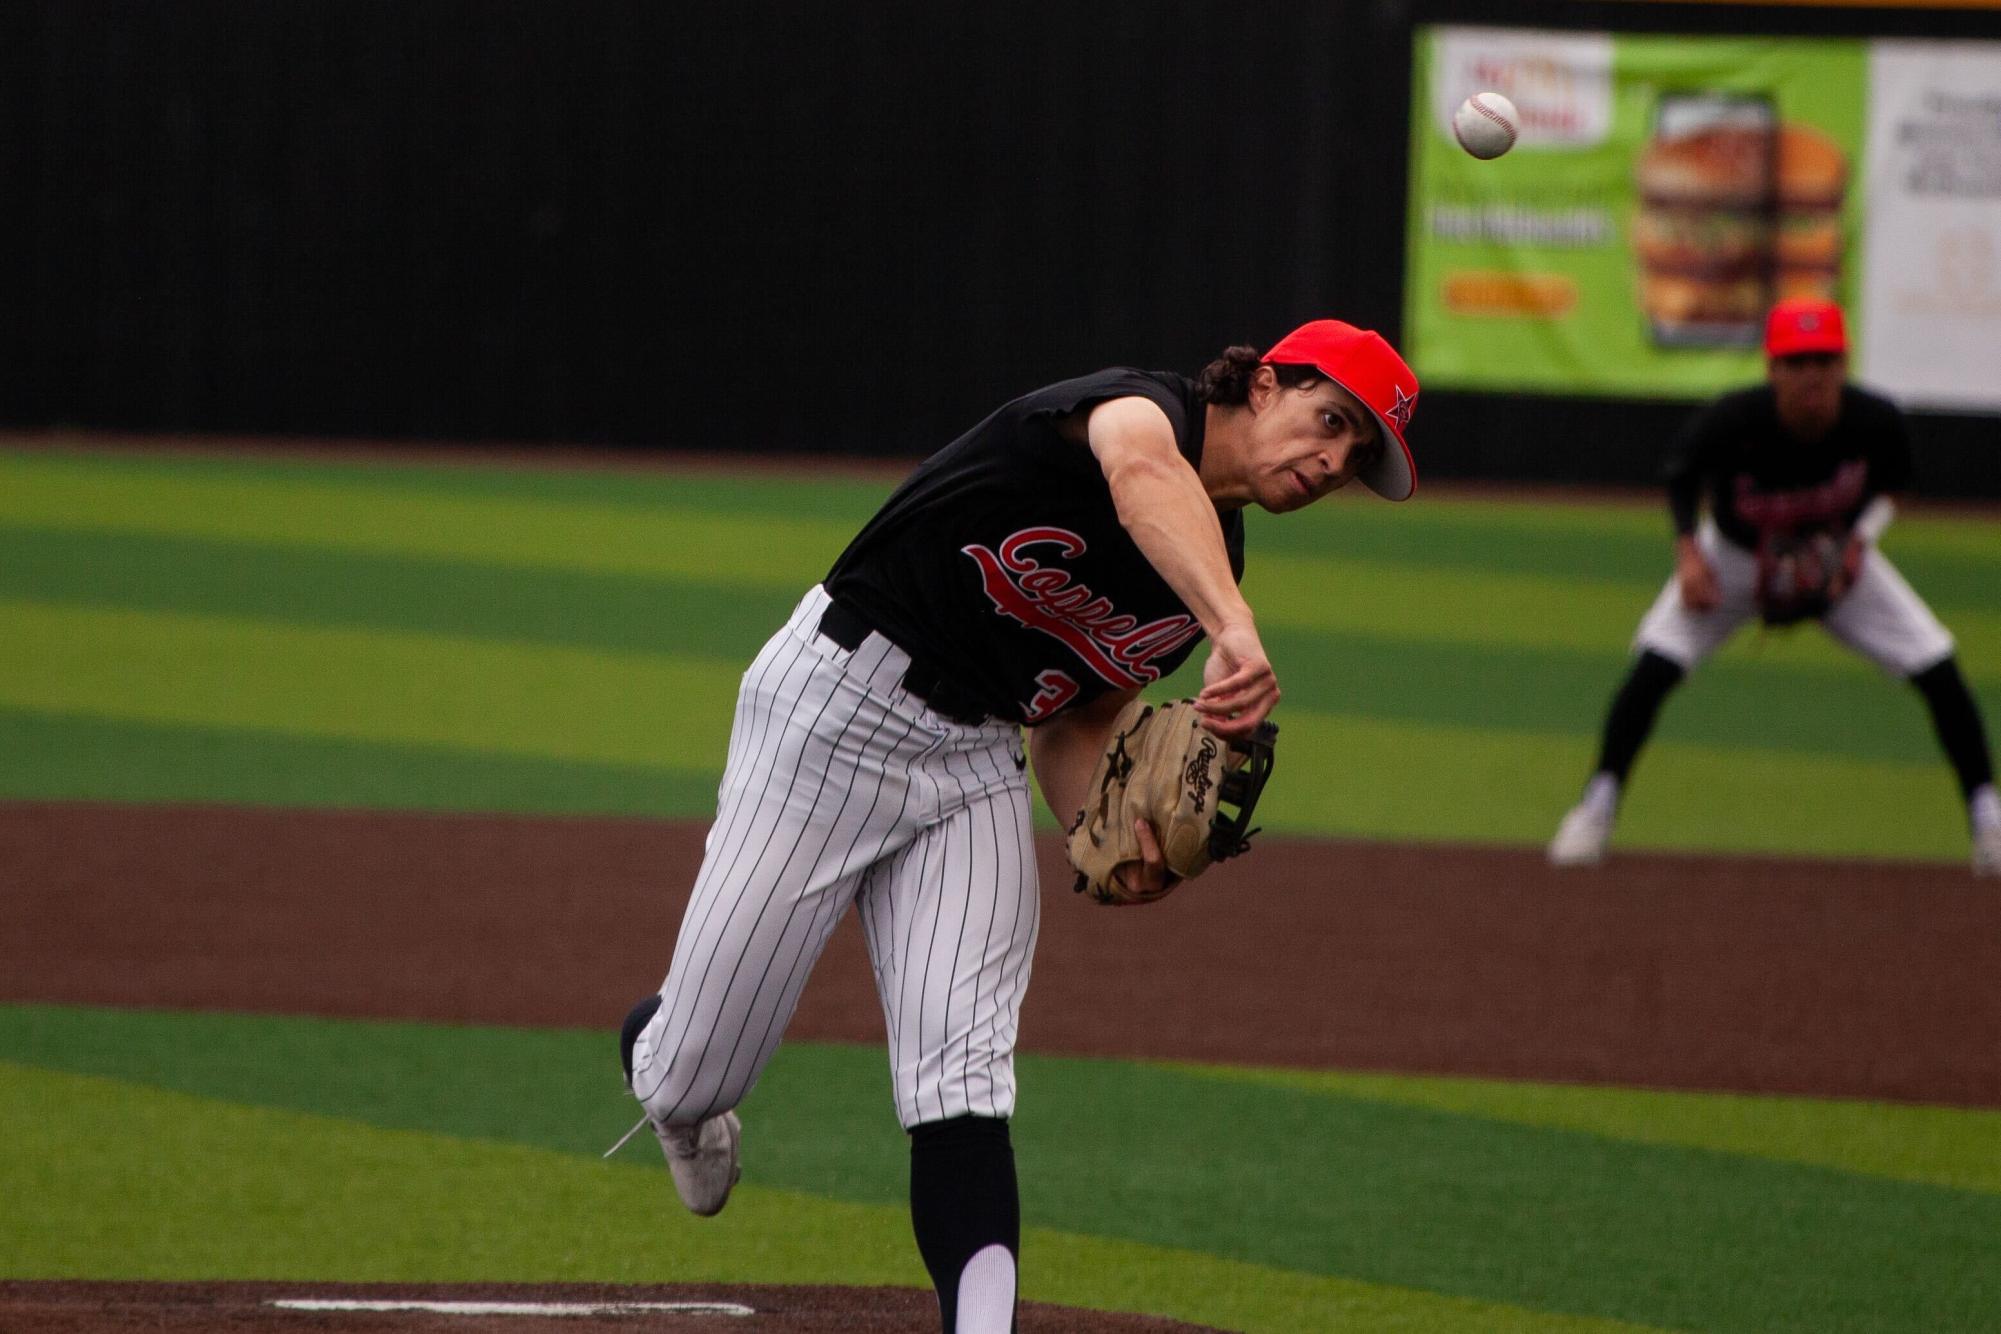 Coppell Senior Day Loss: Rockwall Victorious 5-4 in Tough Baseball Matchup